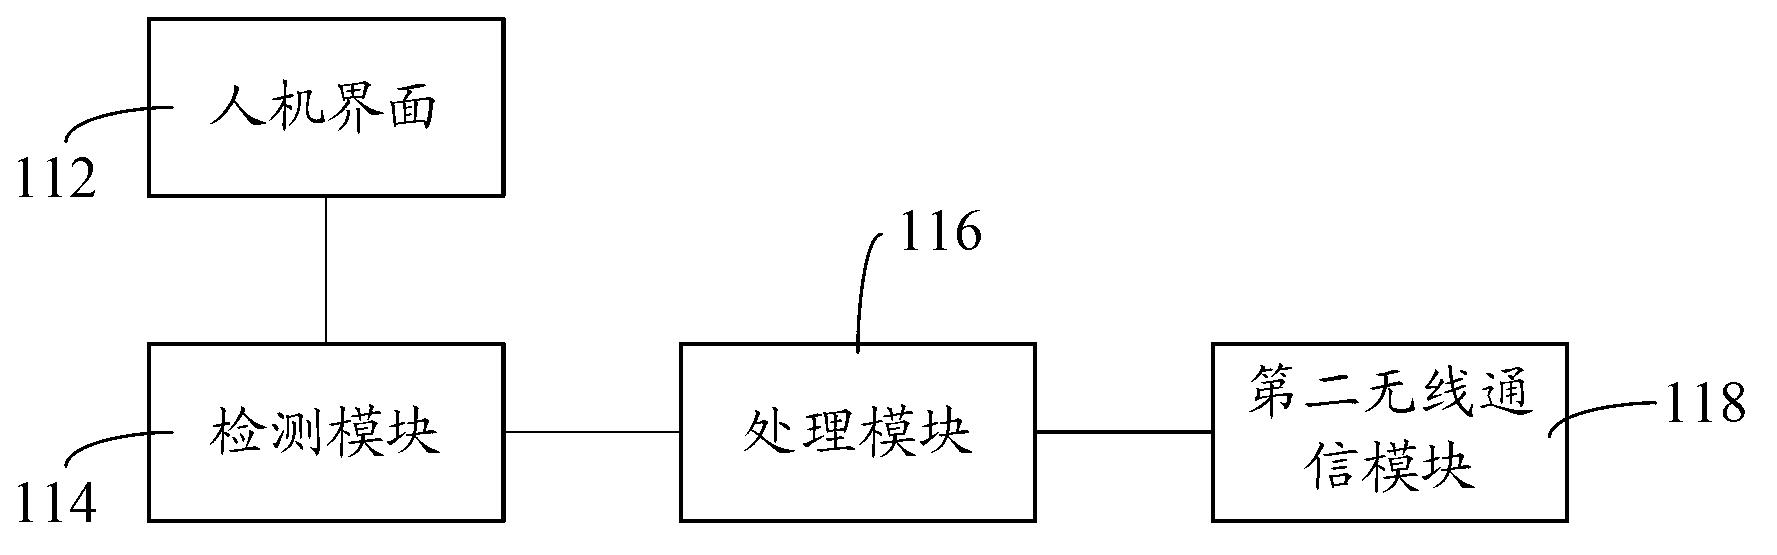 Kitchen appliance function expanding system